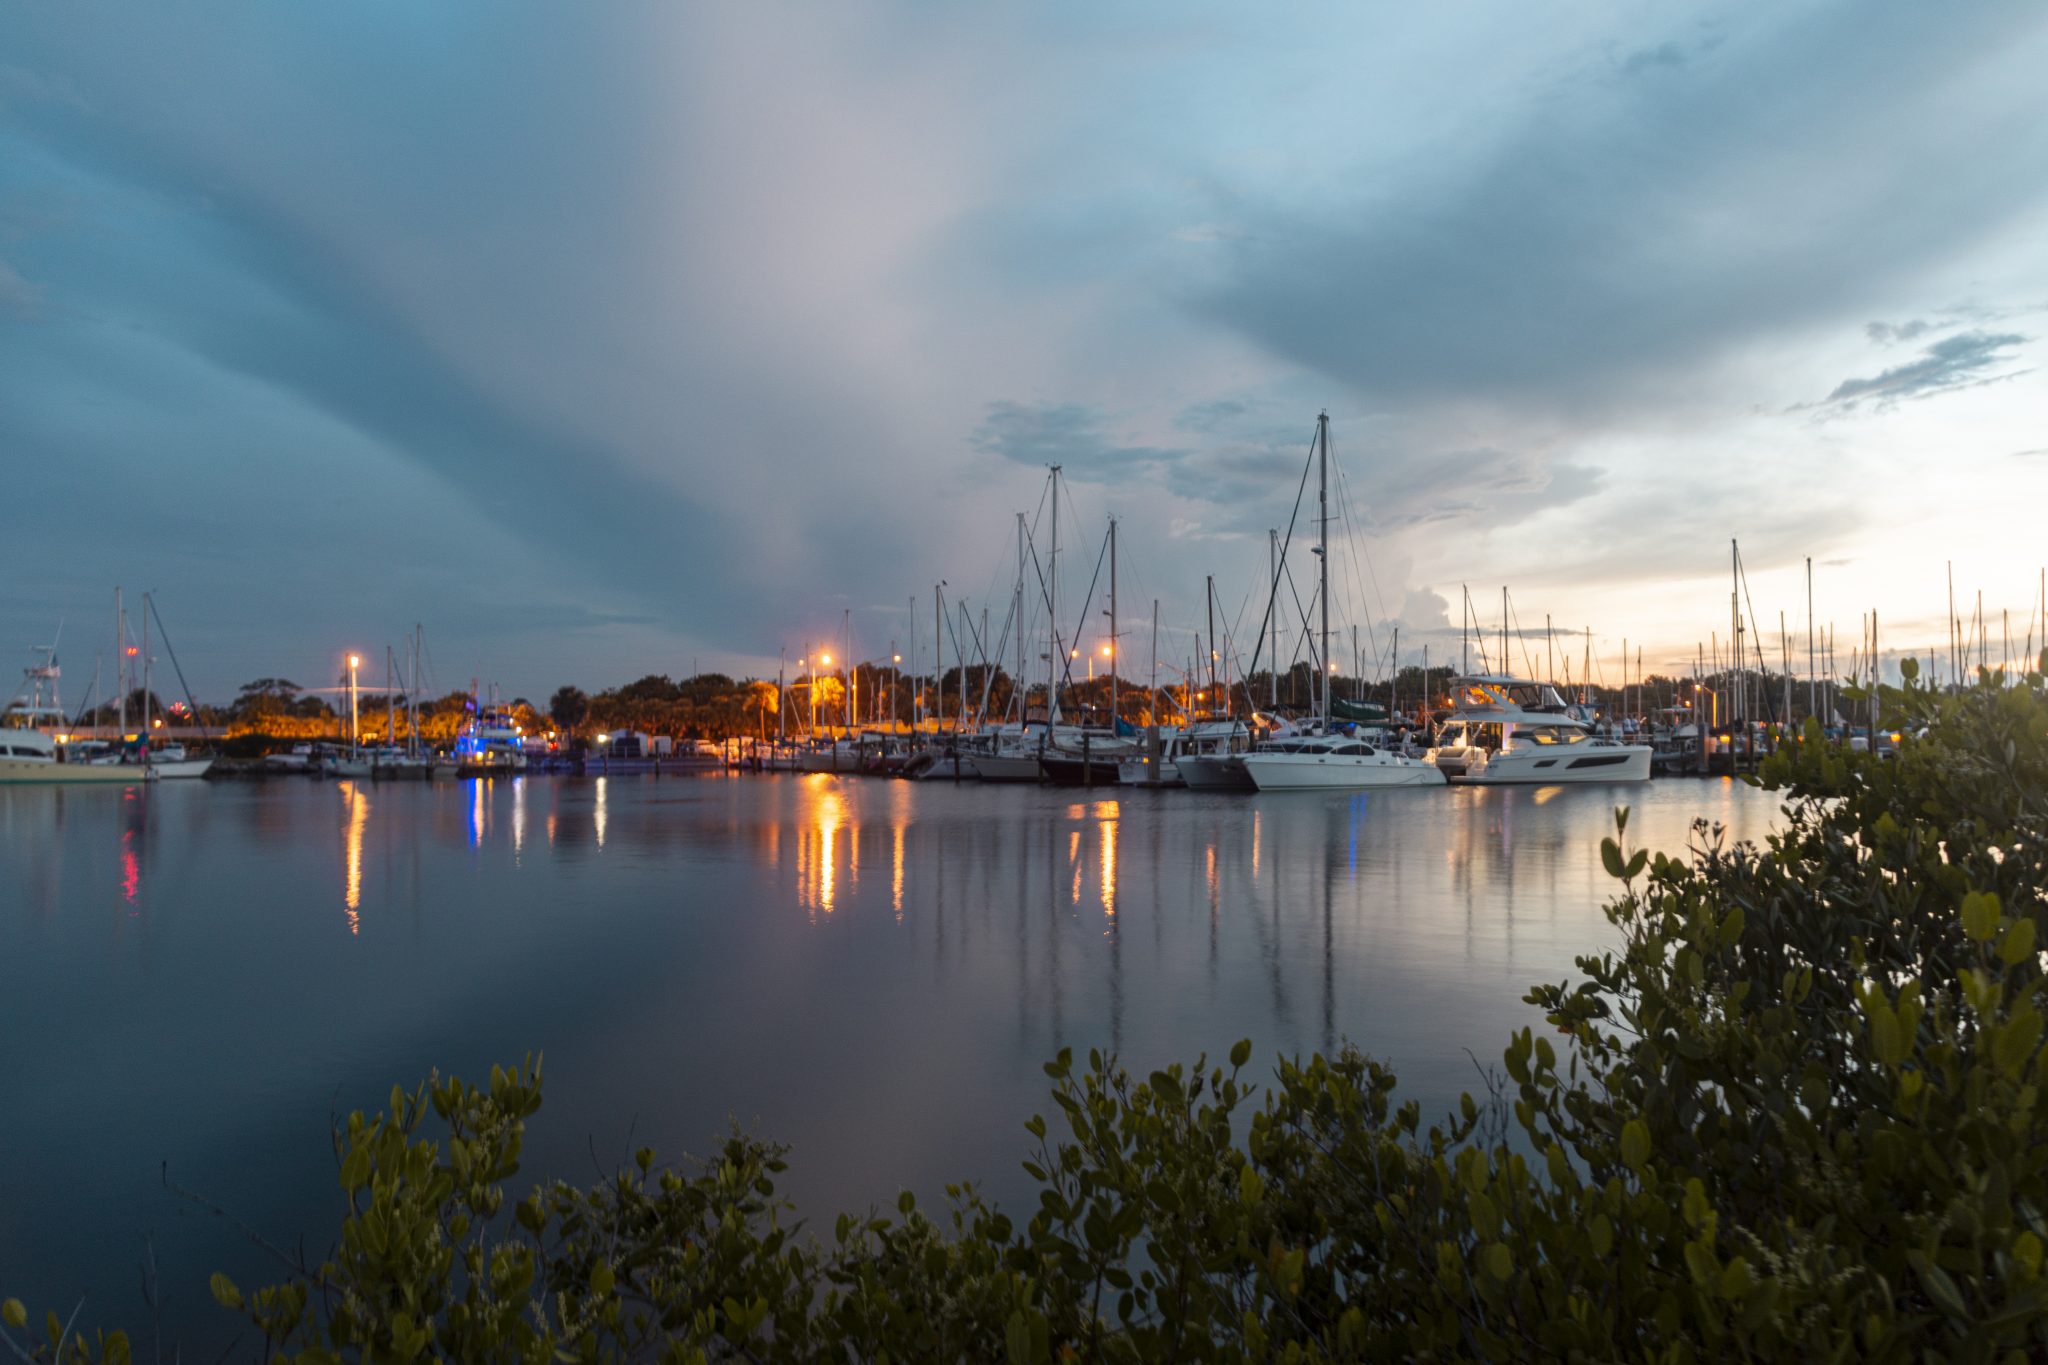 Marina with docked boats after sunset